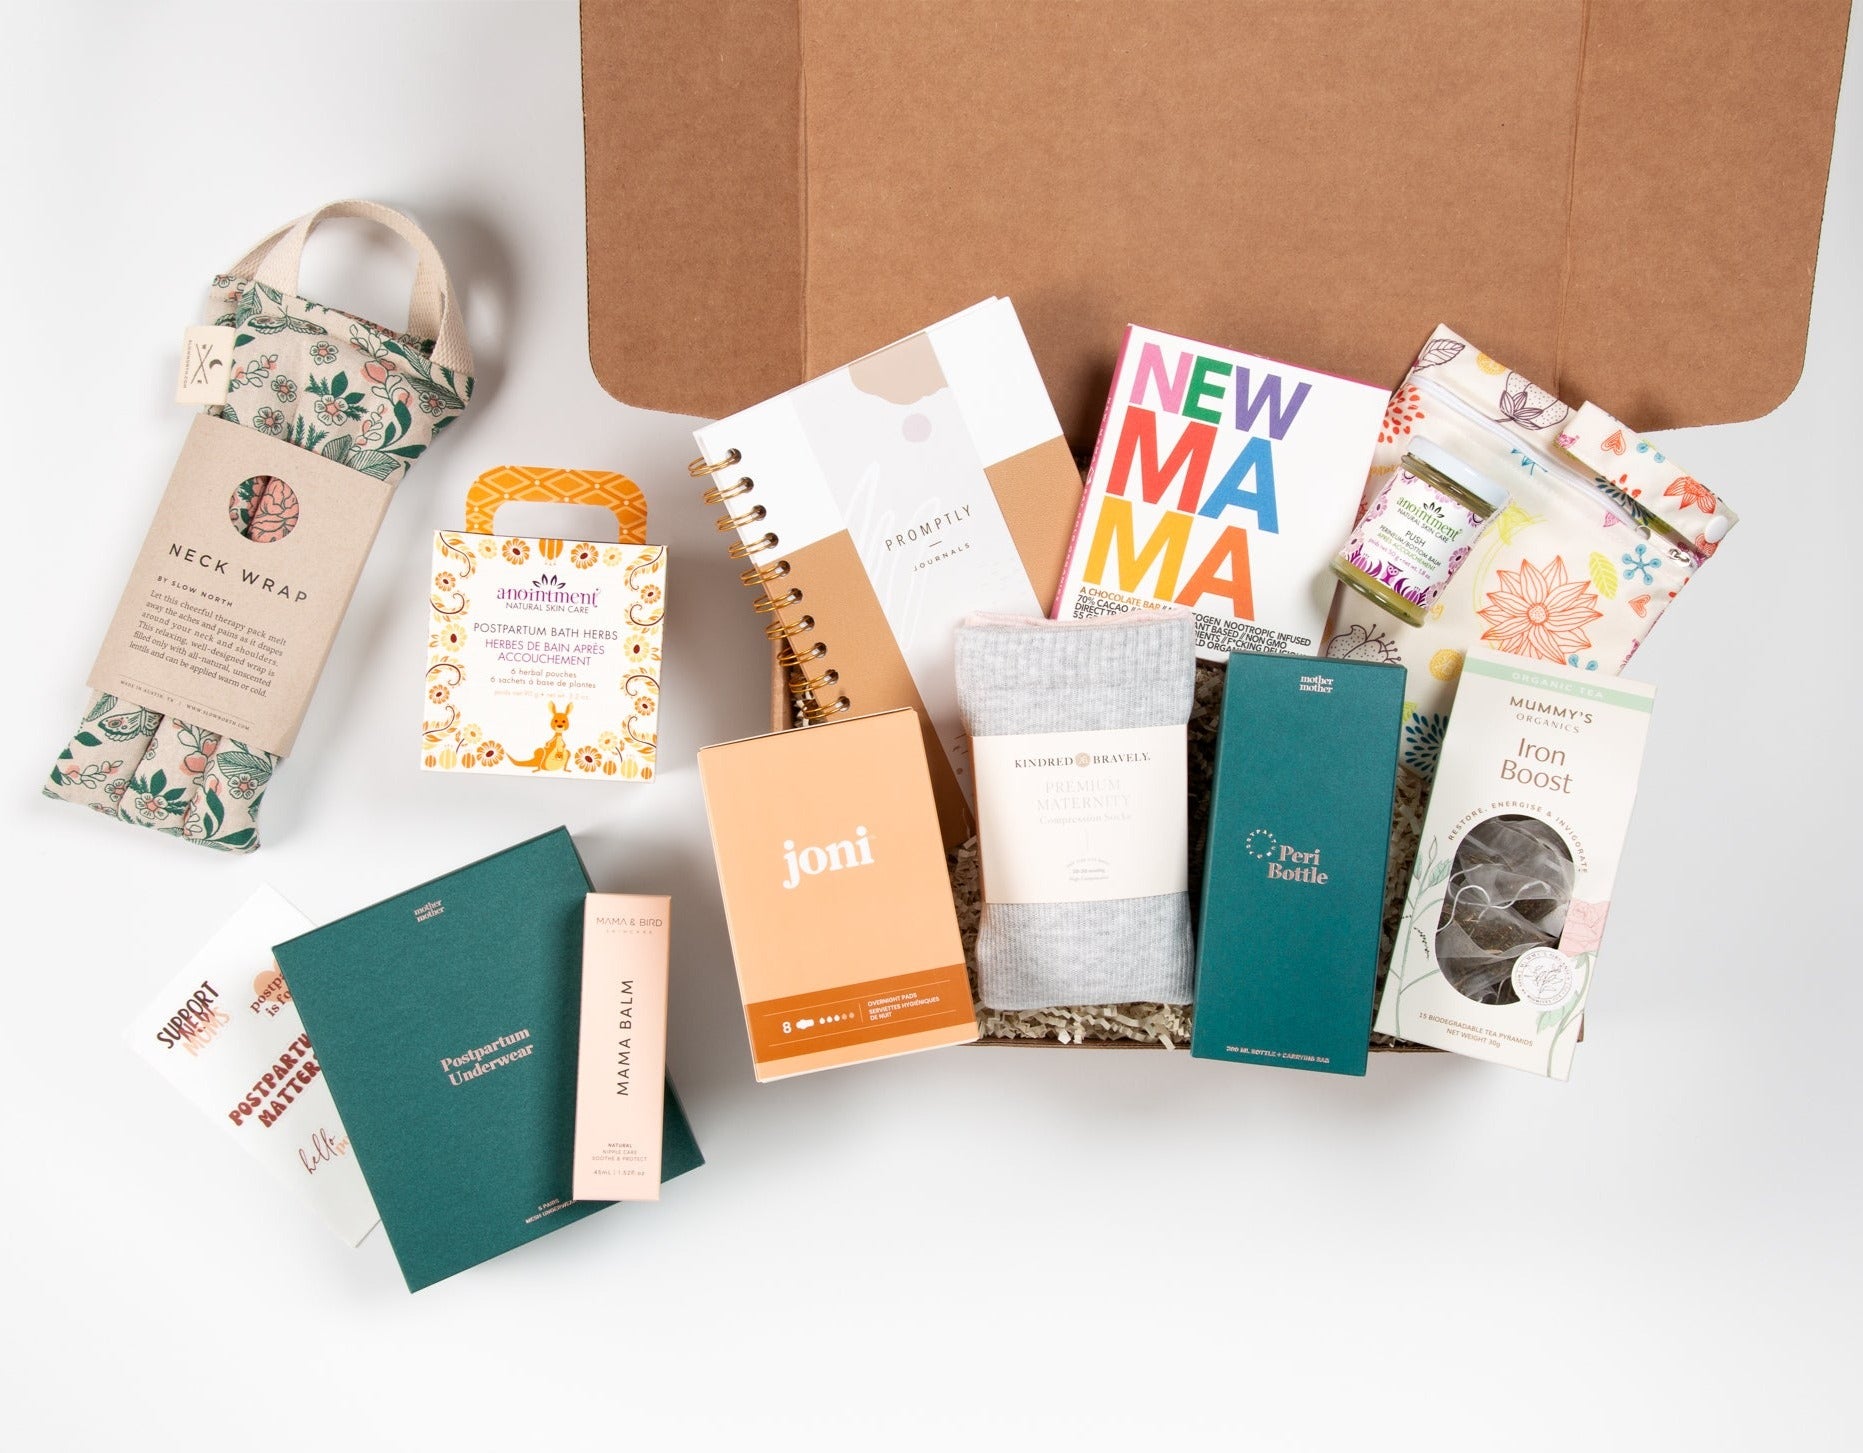 The ultimate new mom gift box for maximum postpartum support